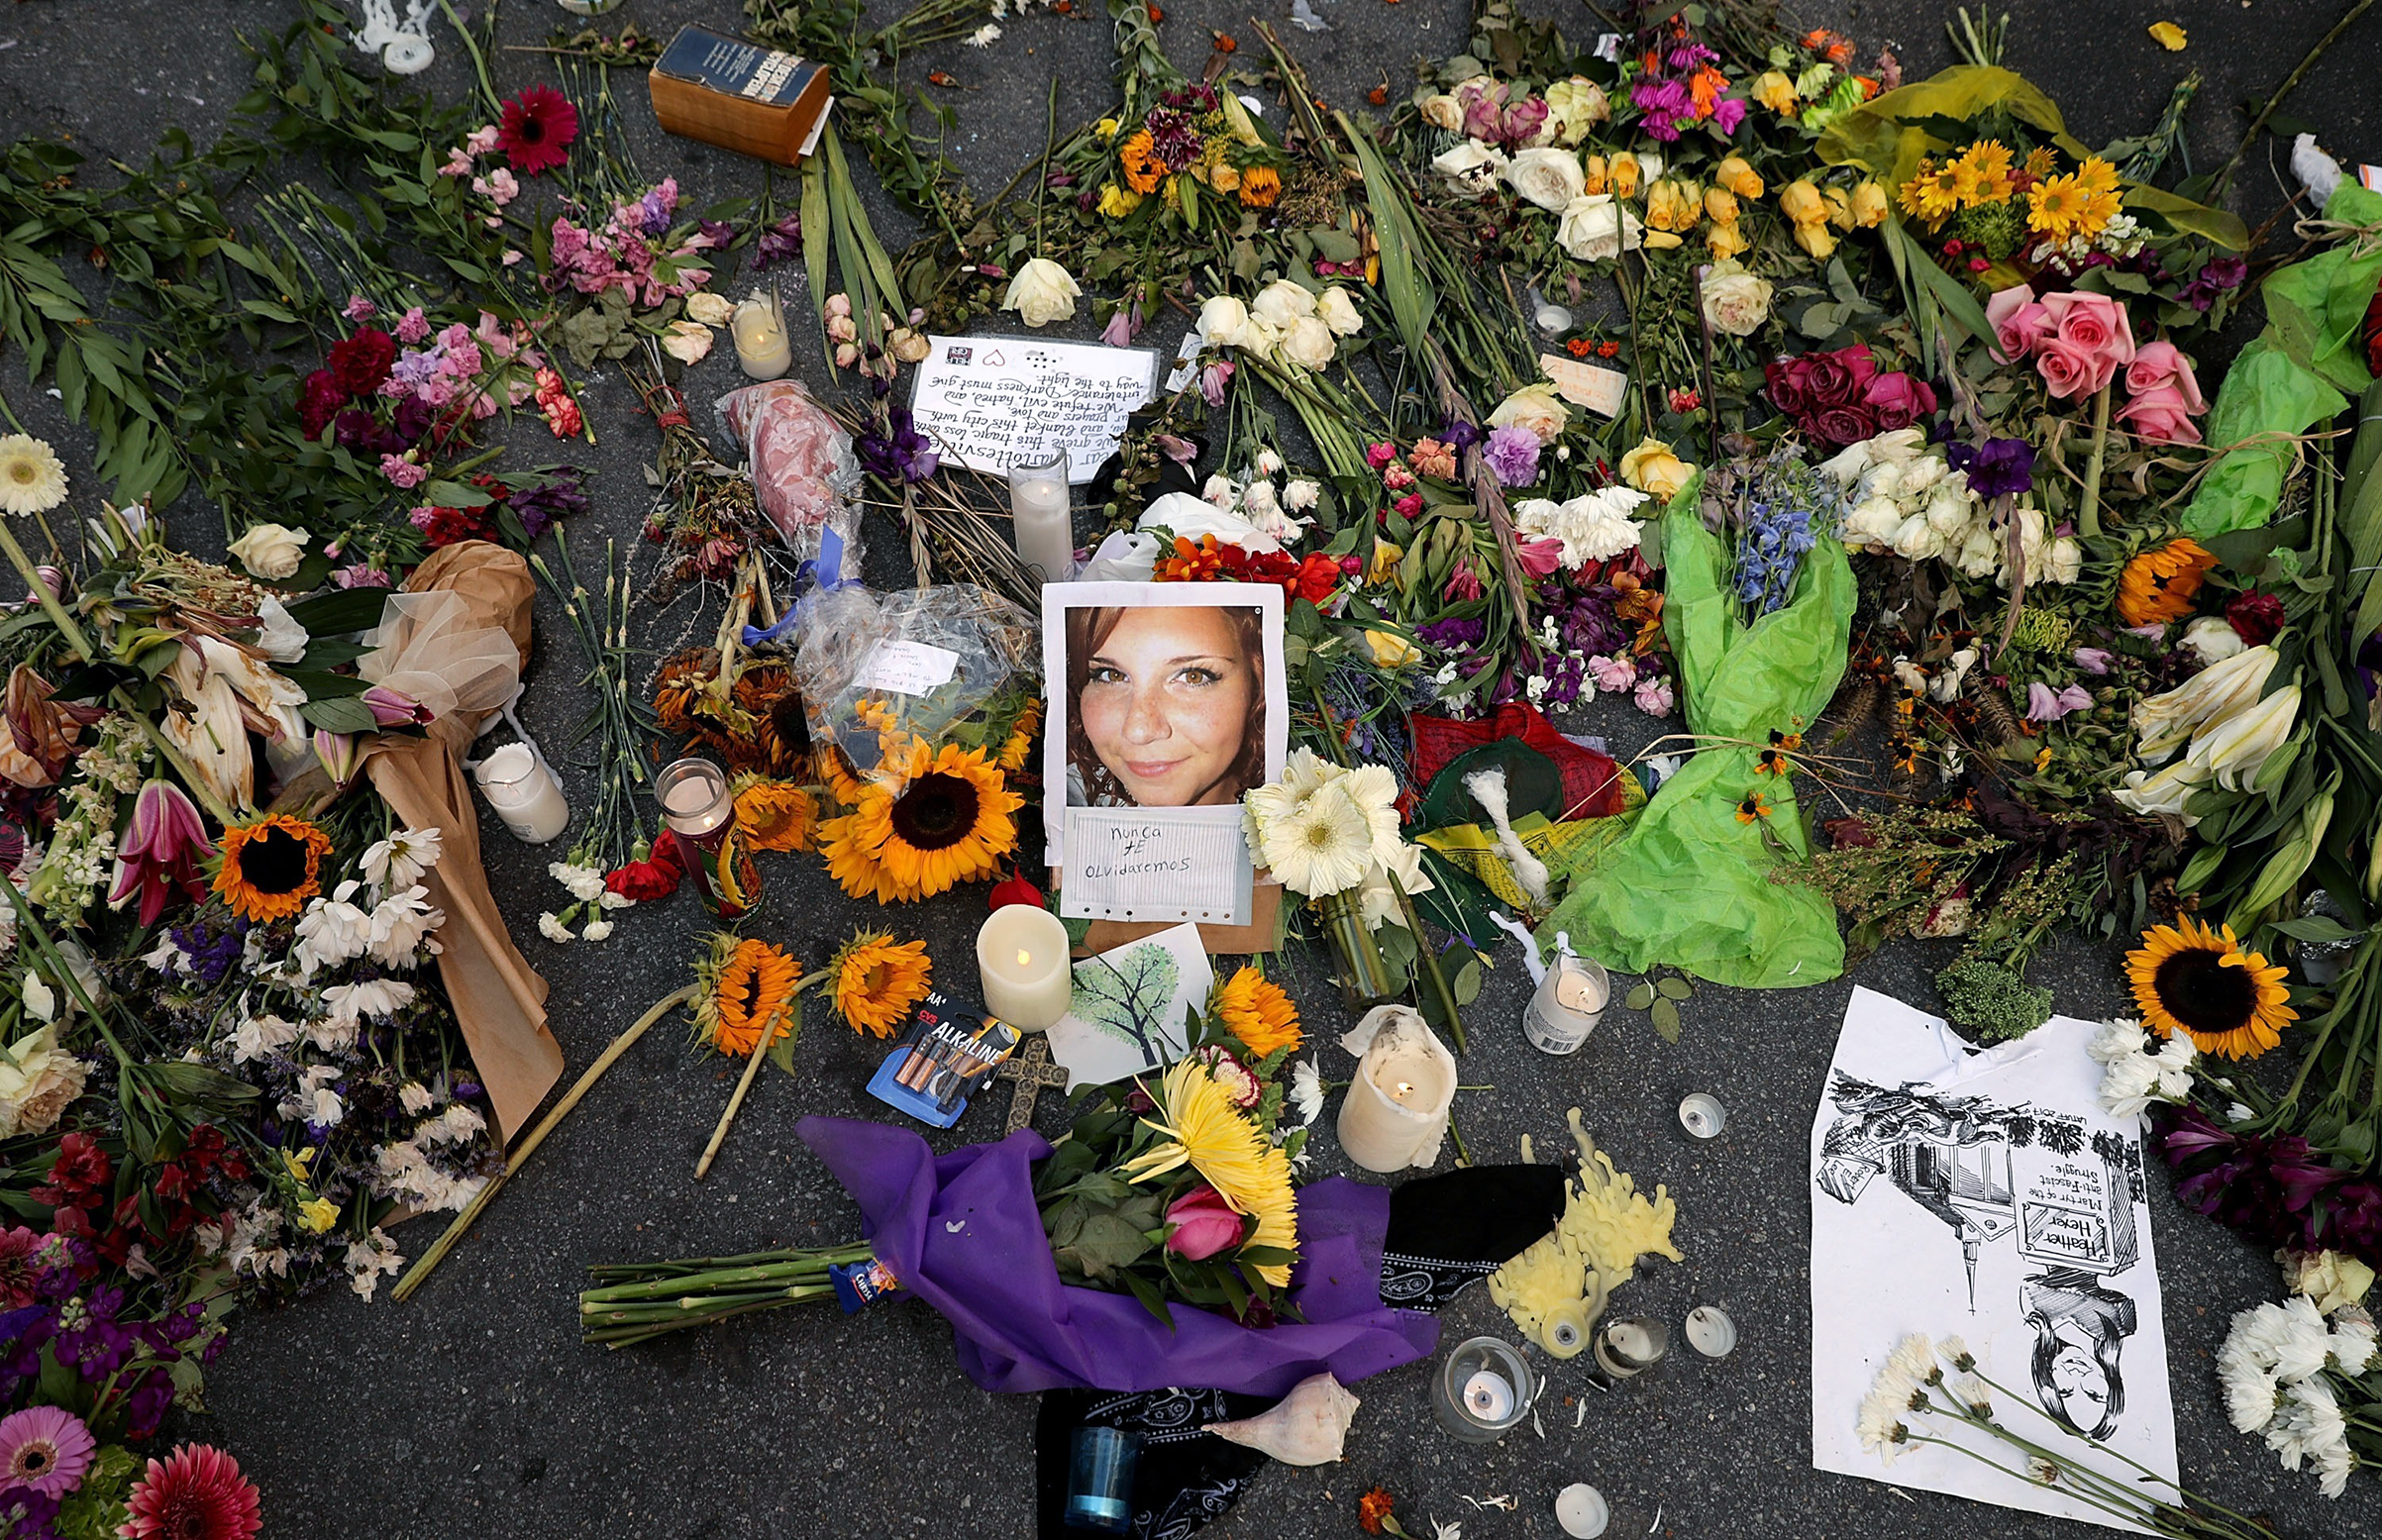 A makeshift memorial at the spot where Heather Heyer died in Charlottesville on Aug. 12 (Chip Somodevilla—Getty Images)